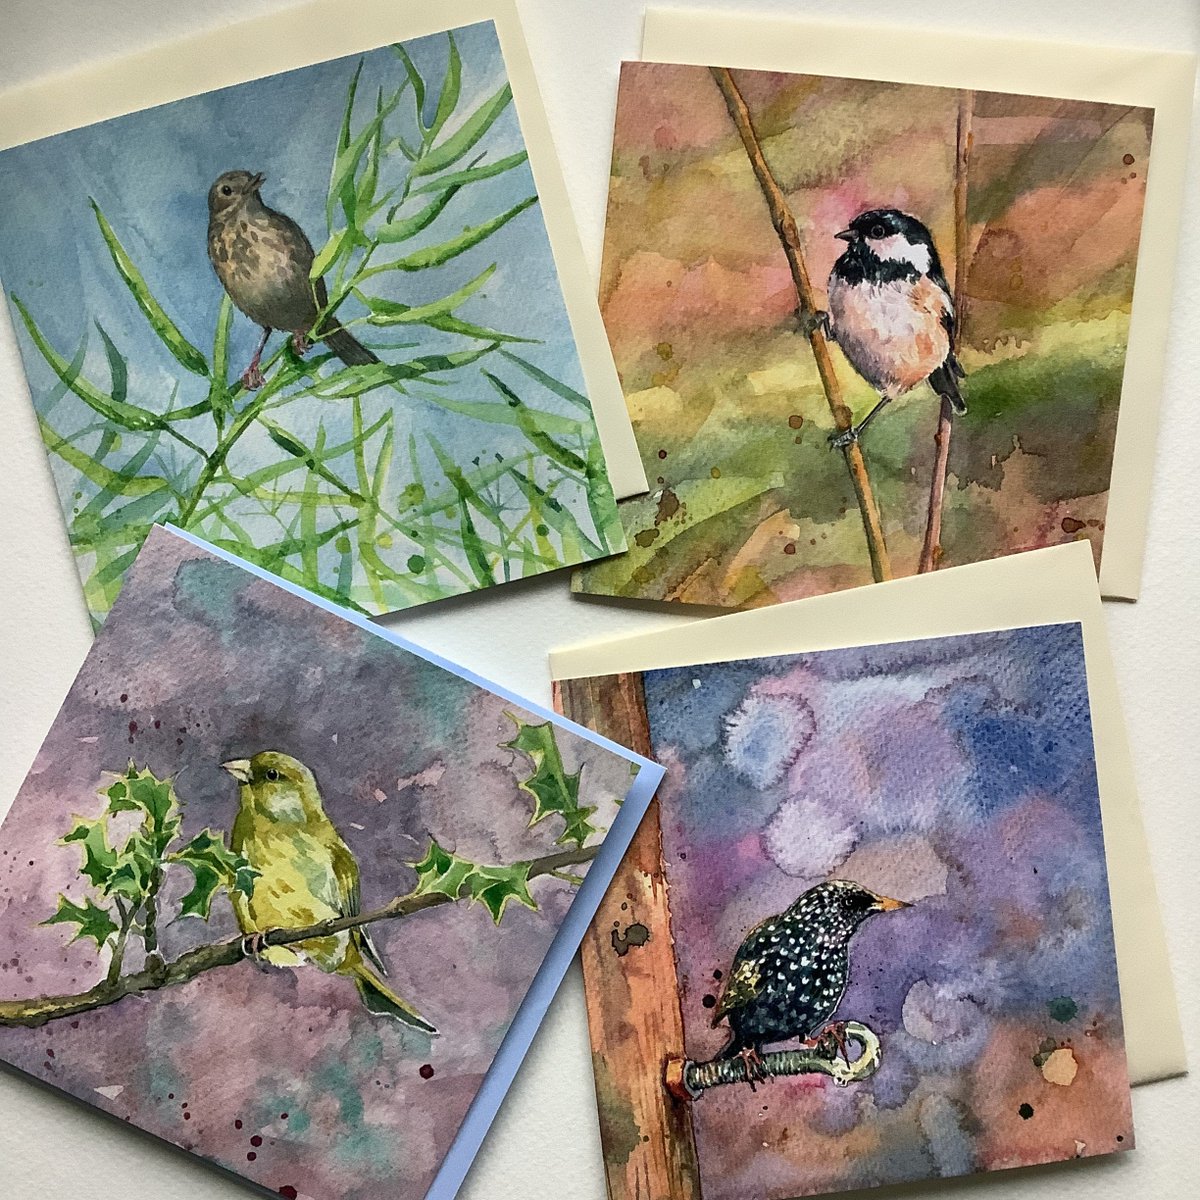 Excited to share the latest addition to my #etsy shop: Selection of 4 blank greetings cards etsy.me/3iMWWHl #birdart #birdcard #watercolourart #greetingscards #lankgreetingscards #coaltit #greenfinch #starling #fscboard